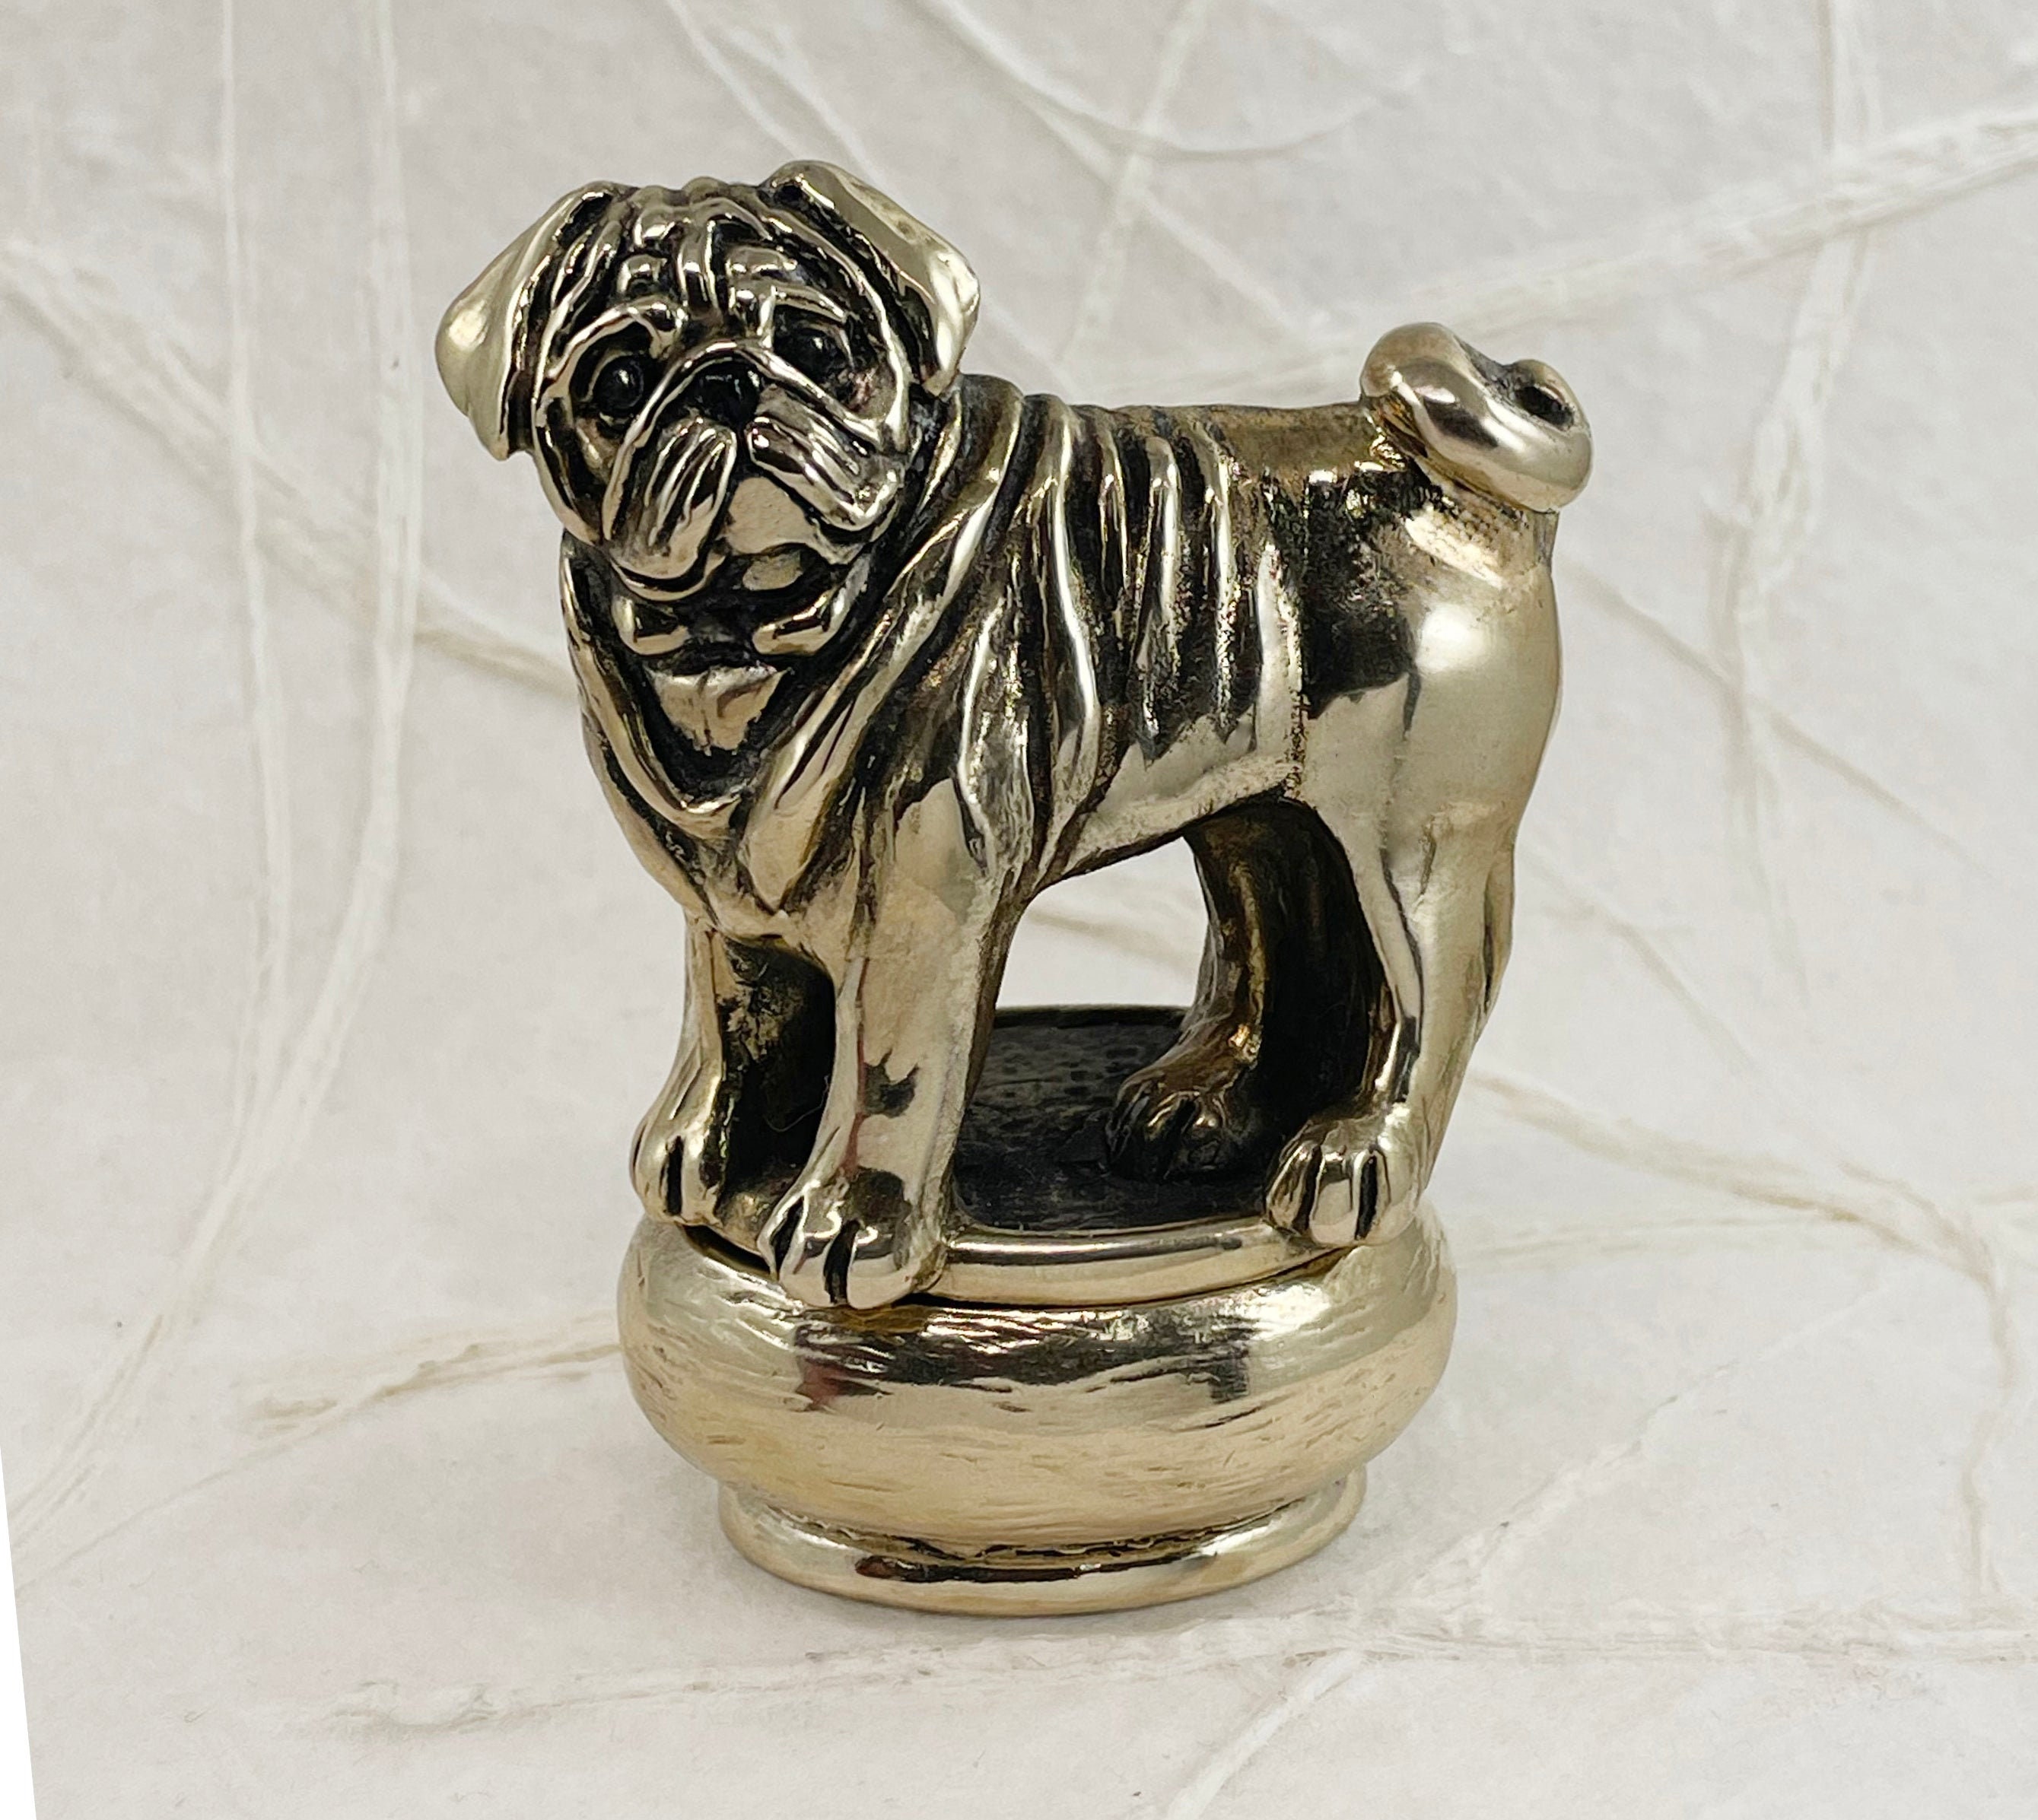 Esquivel and Fees Pug Jewelry Sterling Silver Pug Charm Handmade Dog  Jewelry PG21-AC オブジェ、置き物